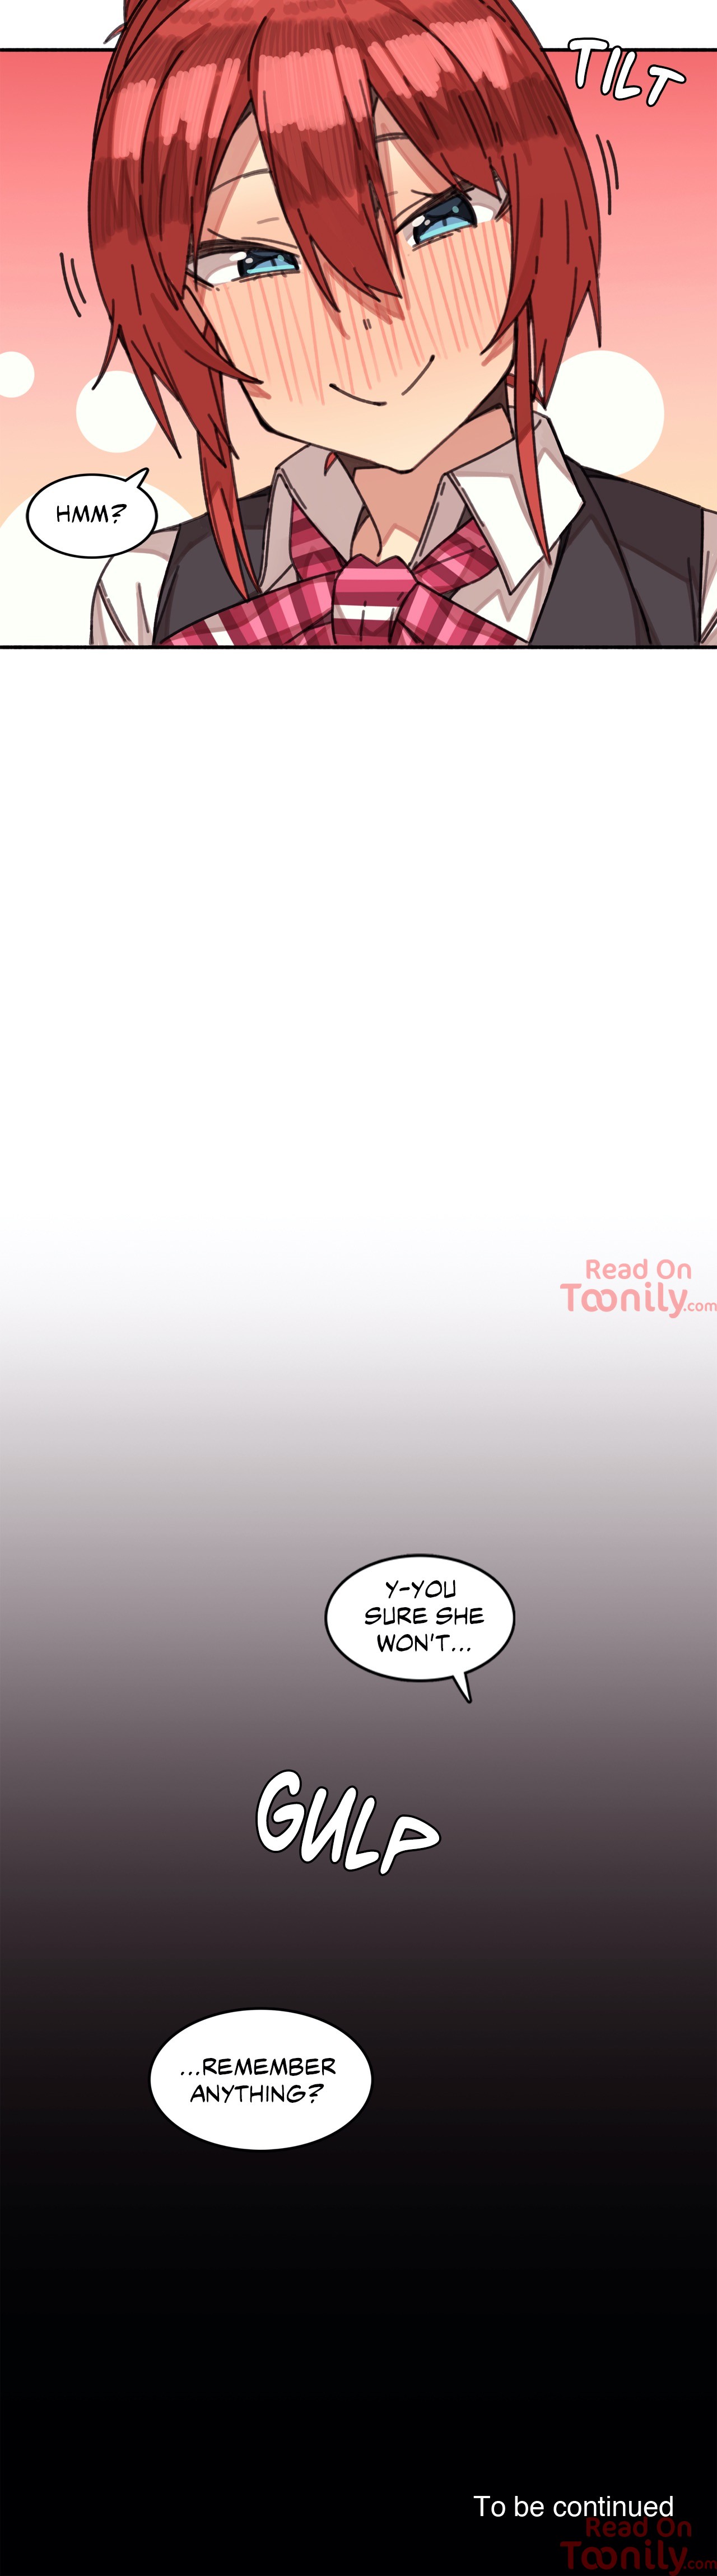 The Girl That Lingers in the Wall - Chapter 2 Page 33